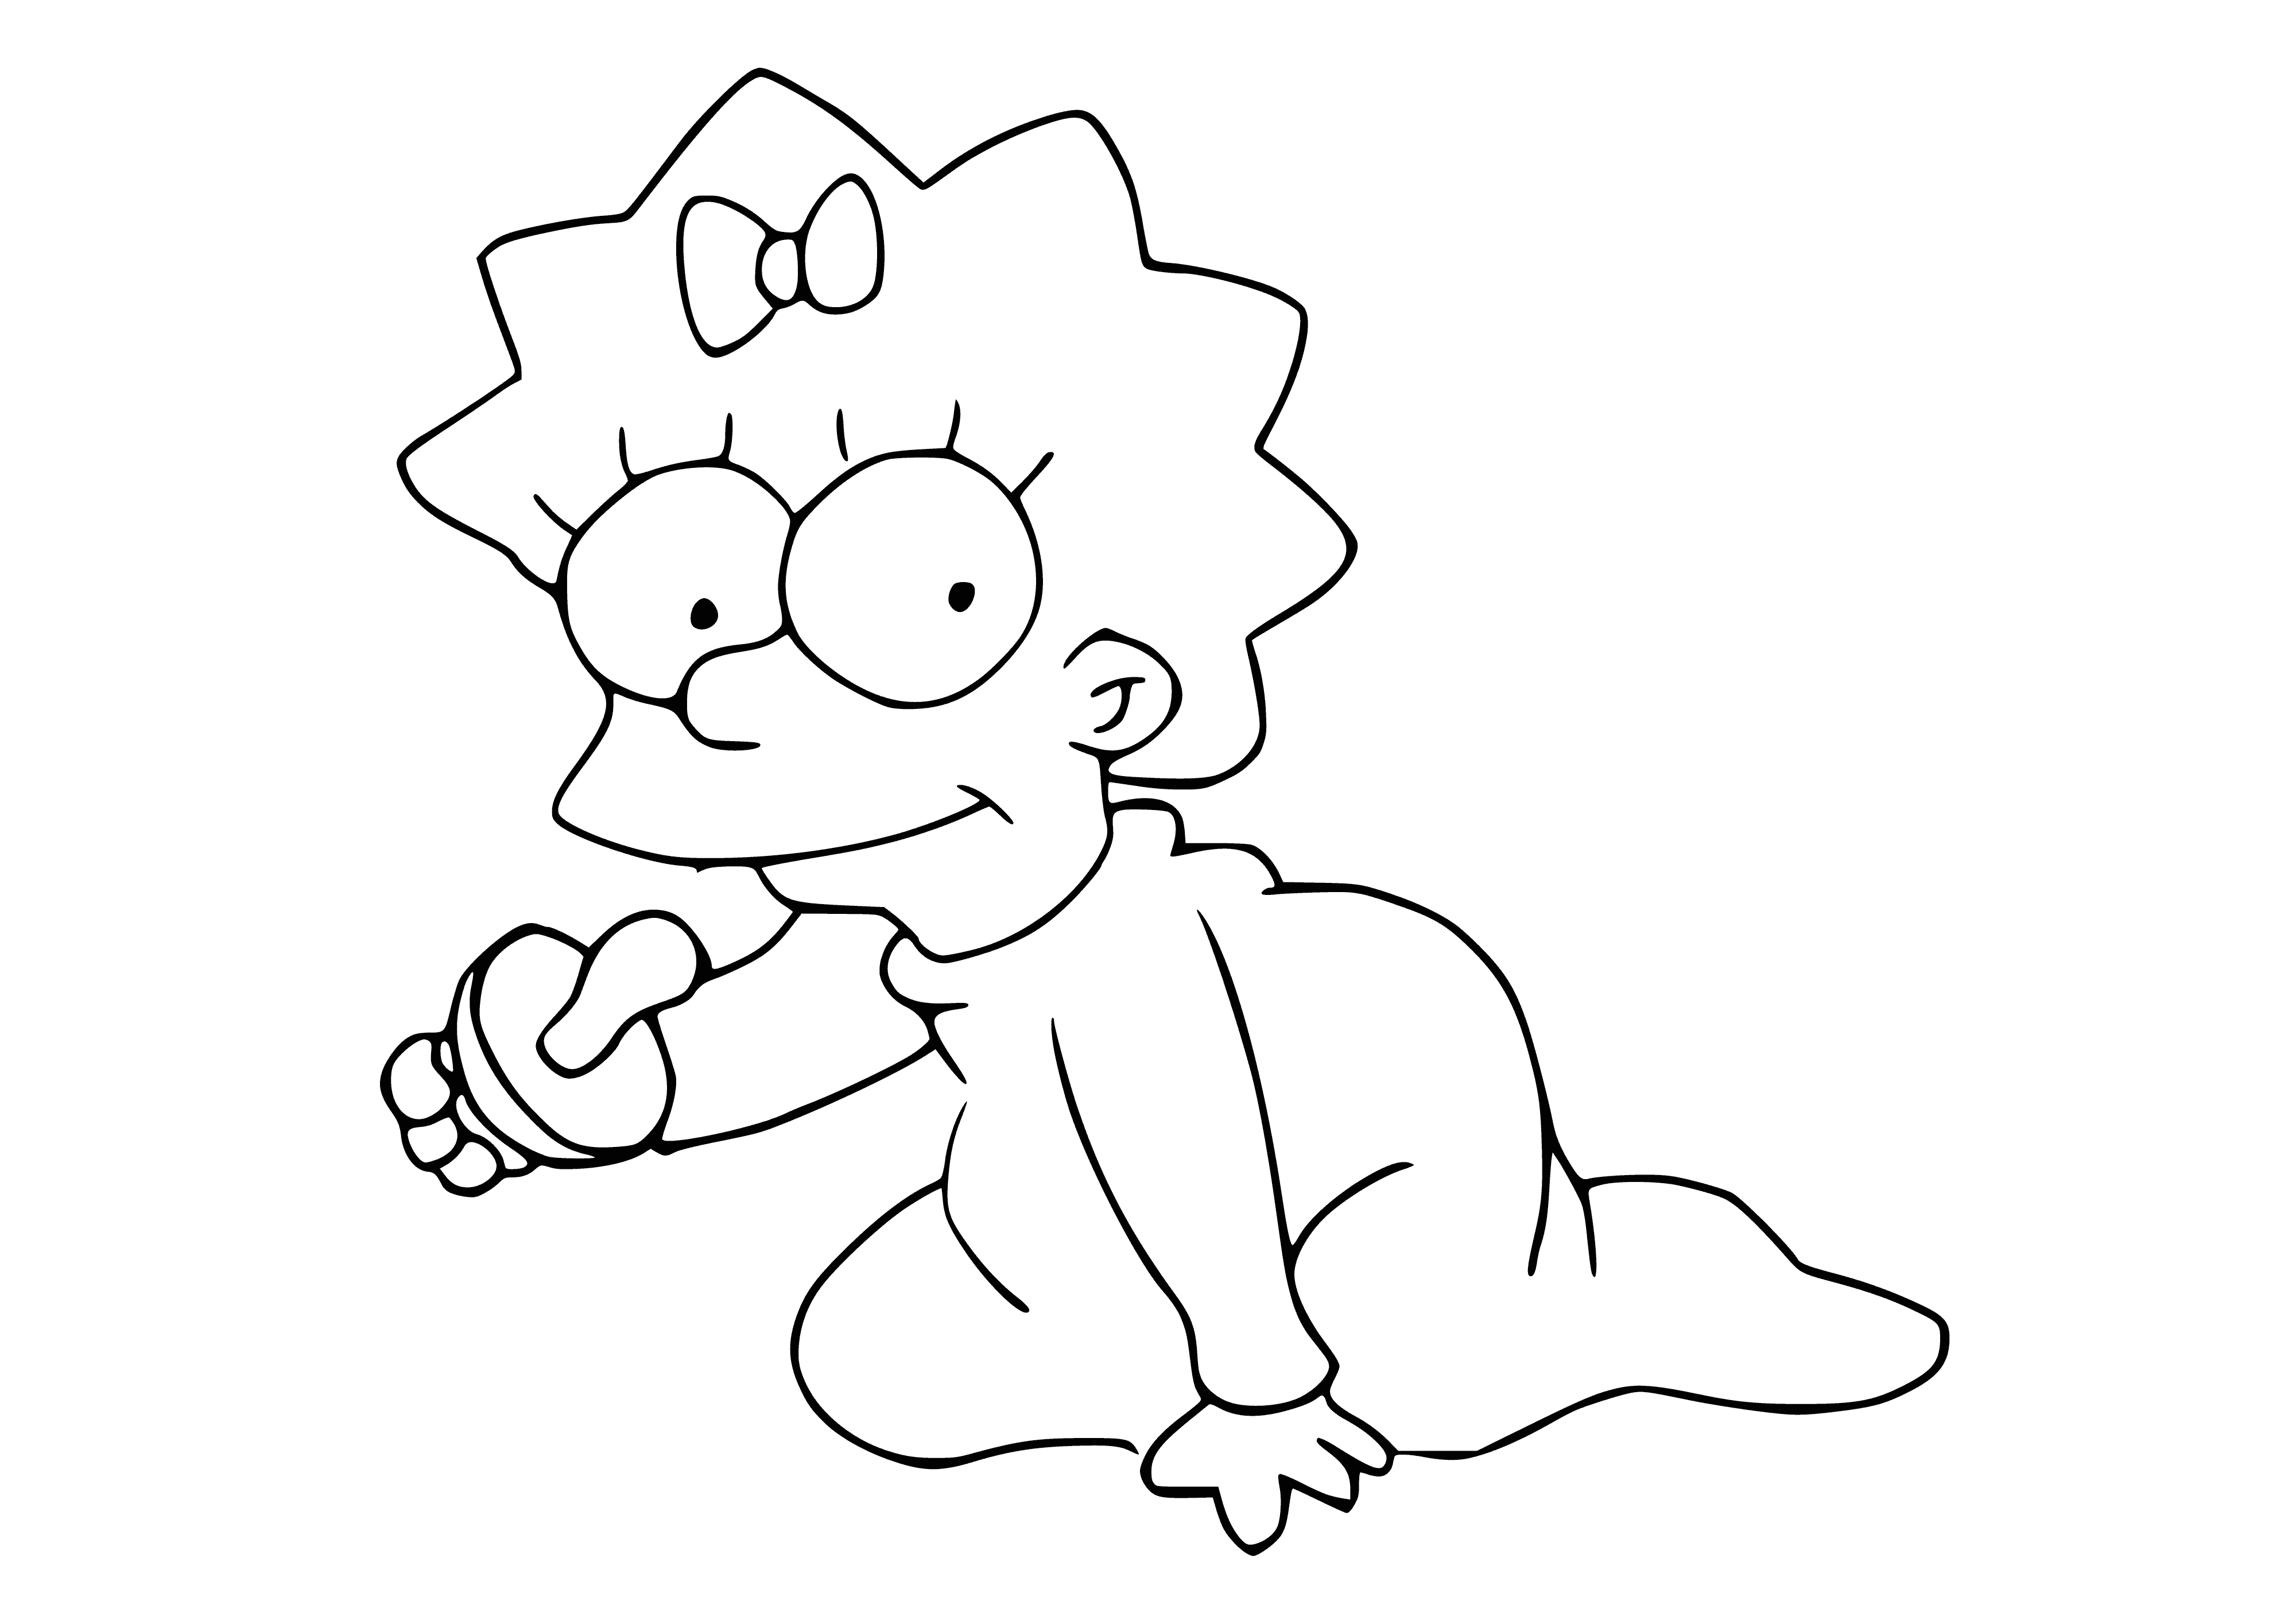 coloring page: Maggie Simpson, infant daughter of Homer & Marge, is seen sitting up, large head & blue eyes, small mouth, styled yellow bob, wearing simple red dress.